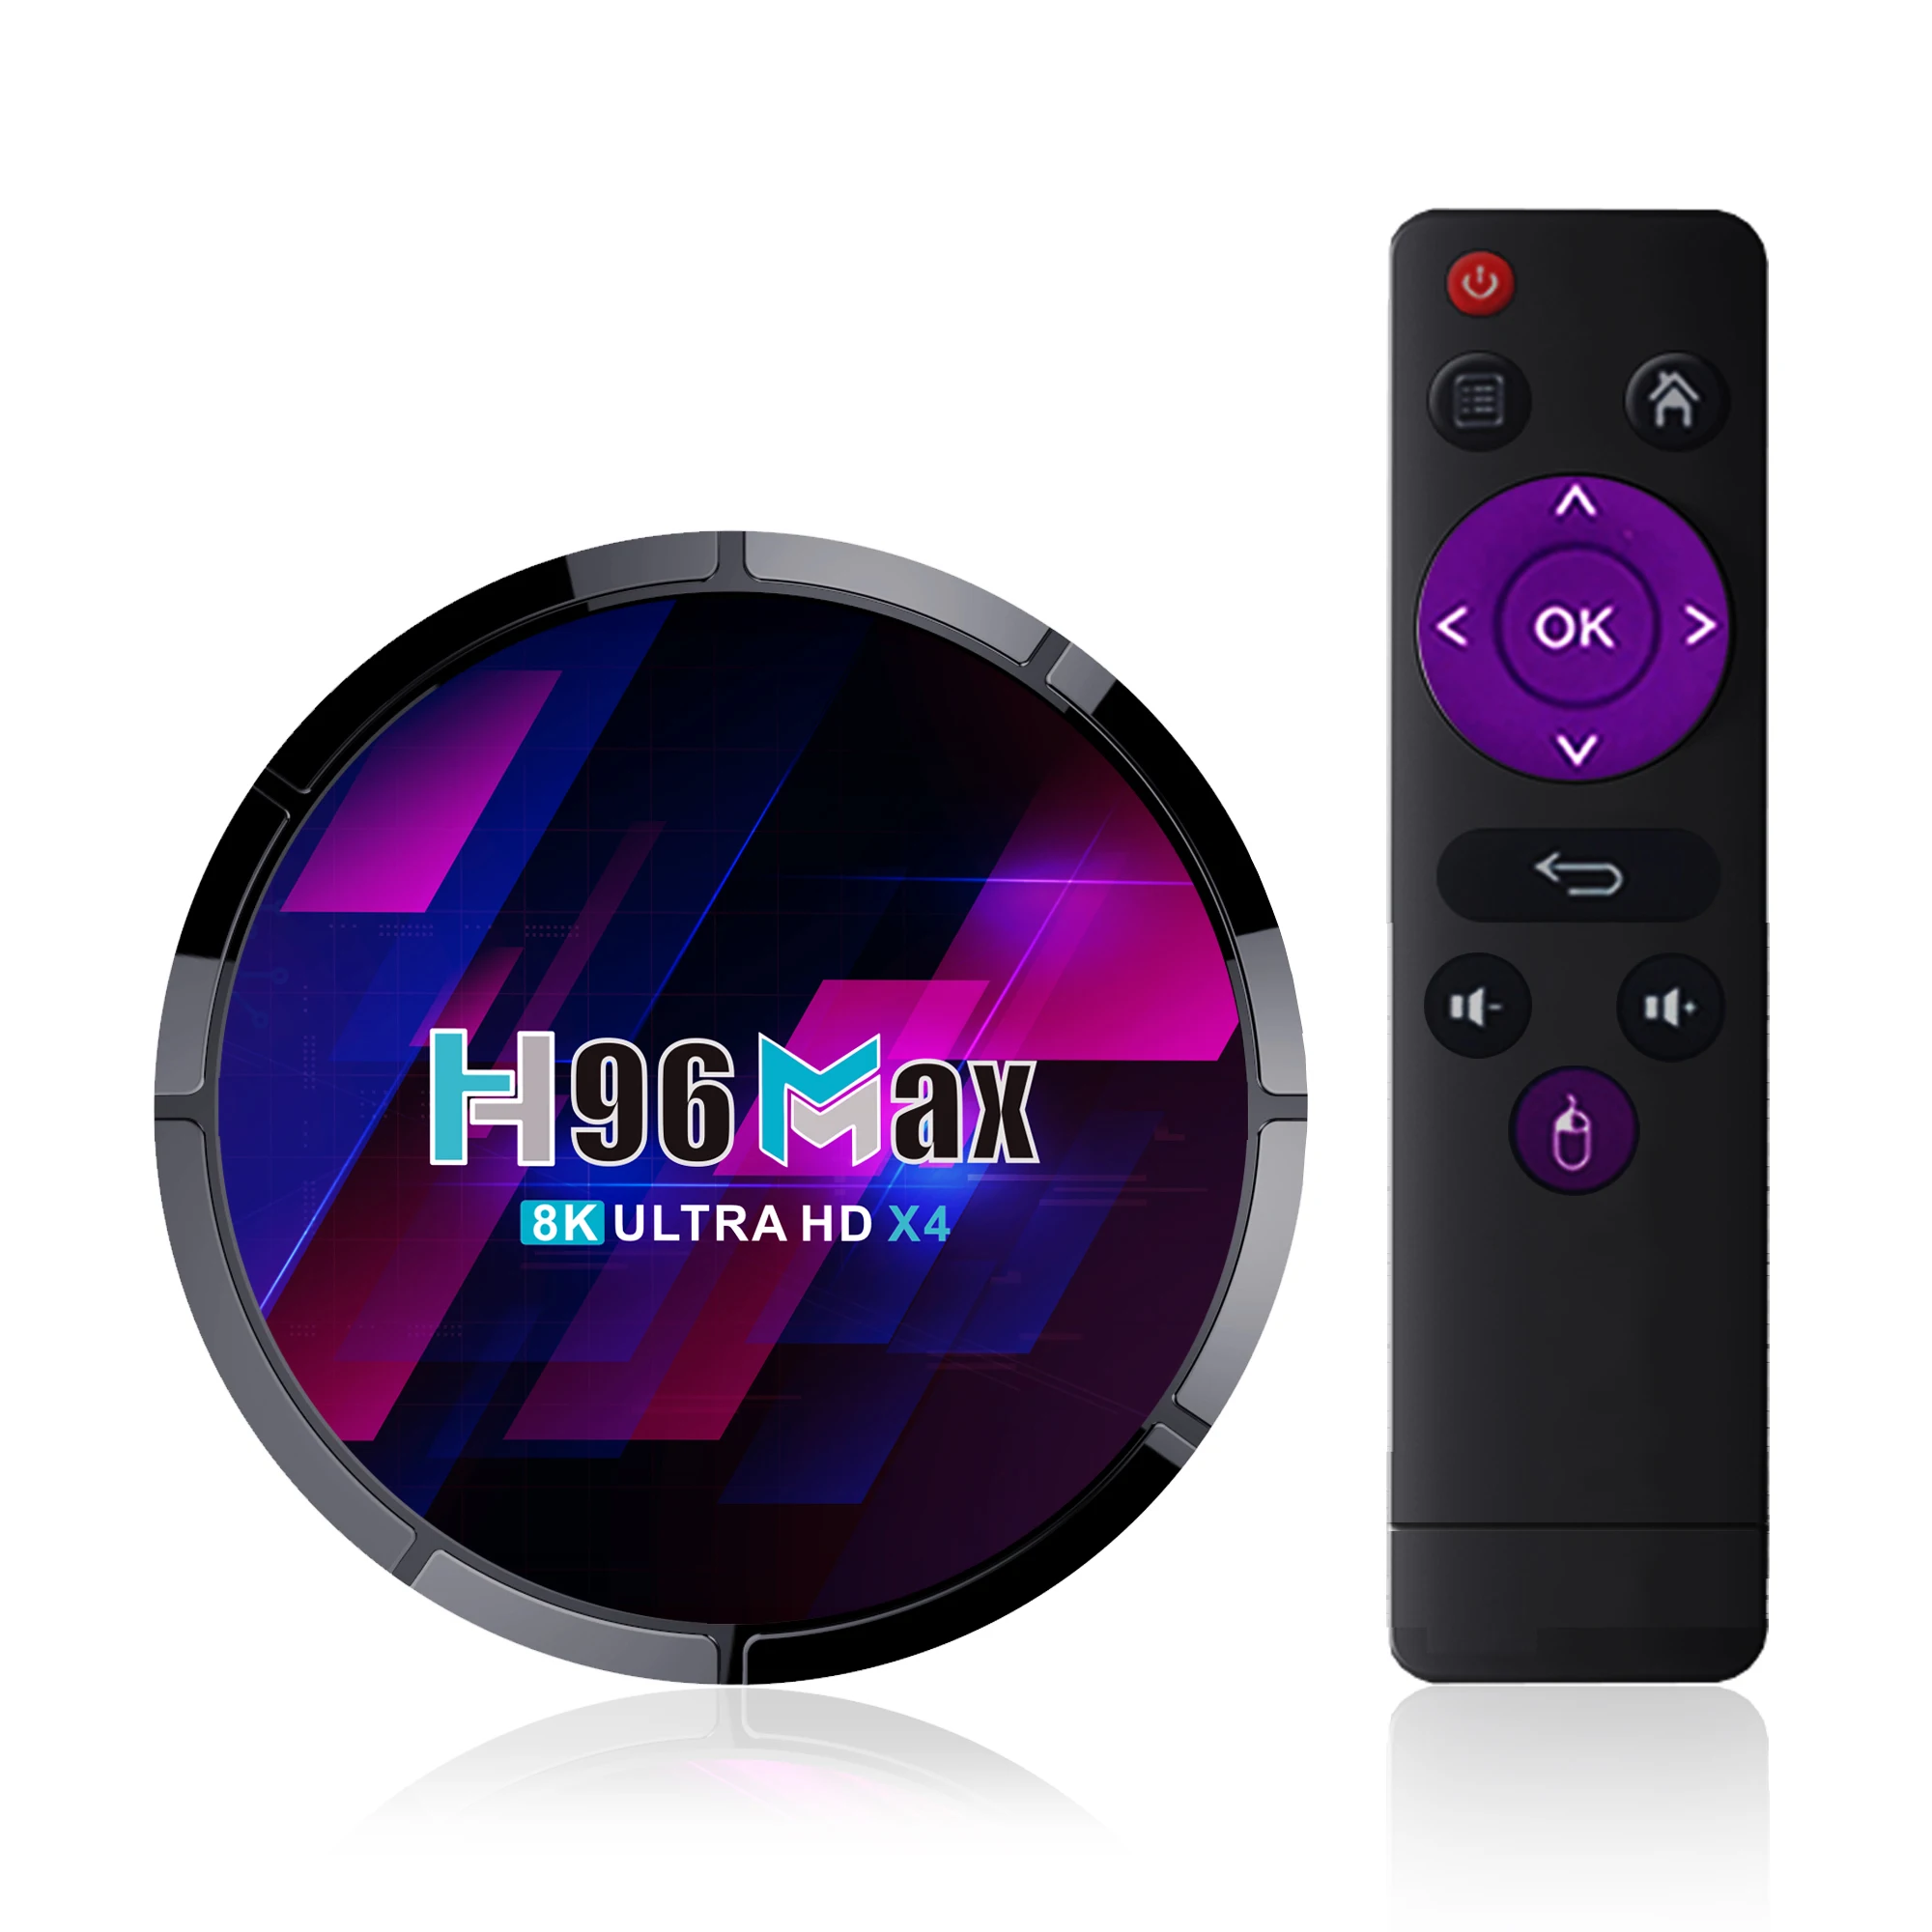 Already Sculpture to justify H96 Max X4 Amlogic S905x4 Transpeed Internet Dual Wifi 8k Hd Android 10 Tv  Box For International Channels - Buy H96 Max X4 Amlogic S905x4 Android10.0  Dual Wifi 2gb/4gb Ram 16gb/32gb/64gb Rom